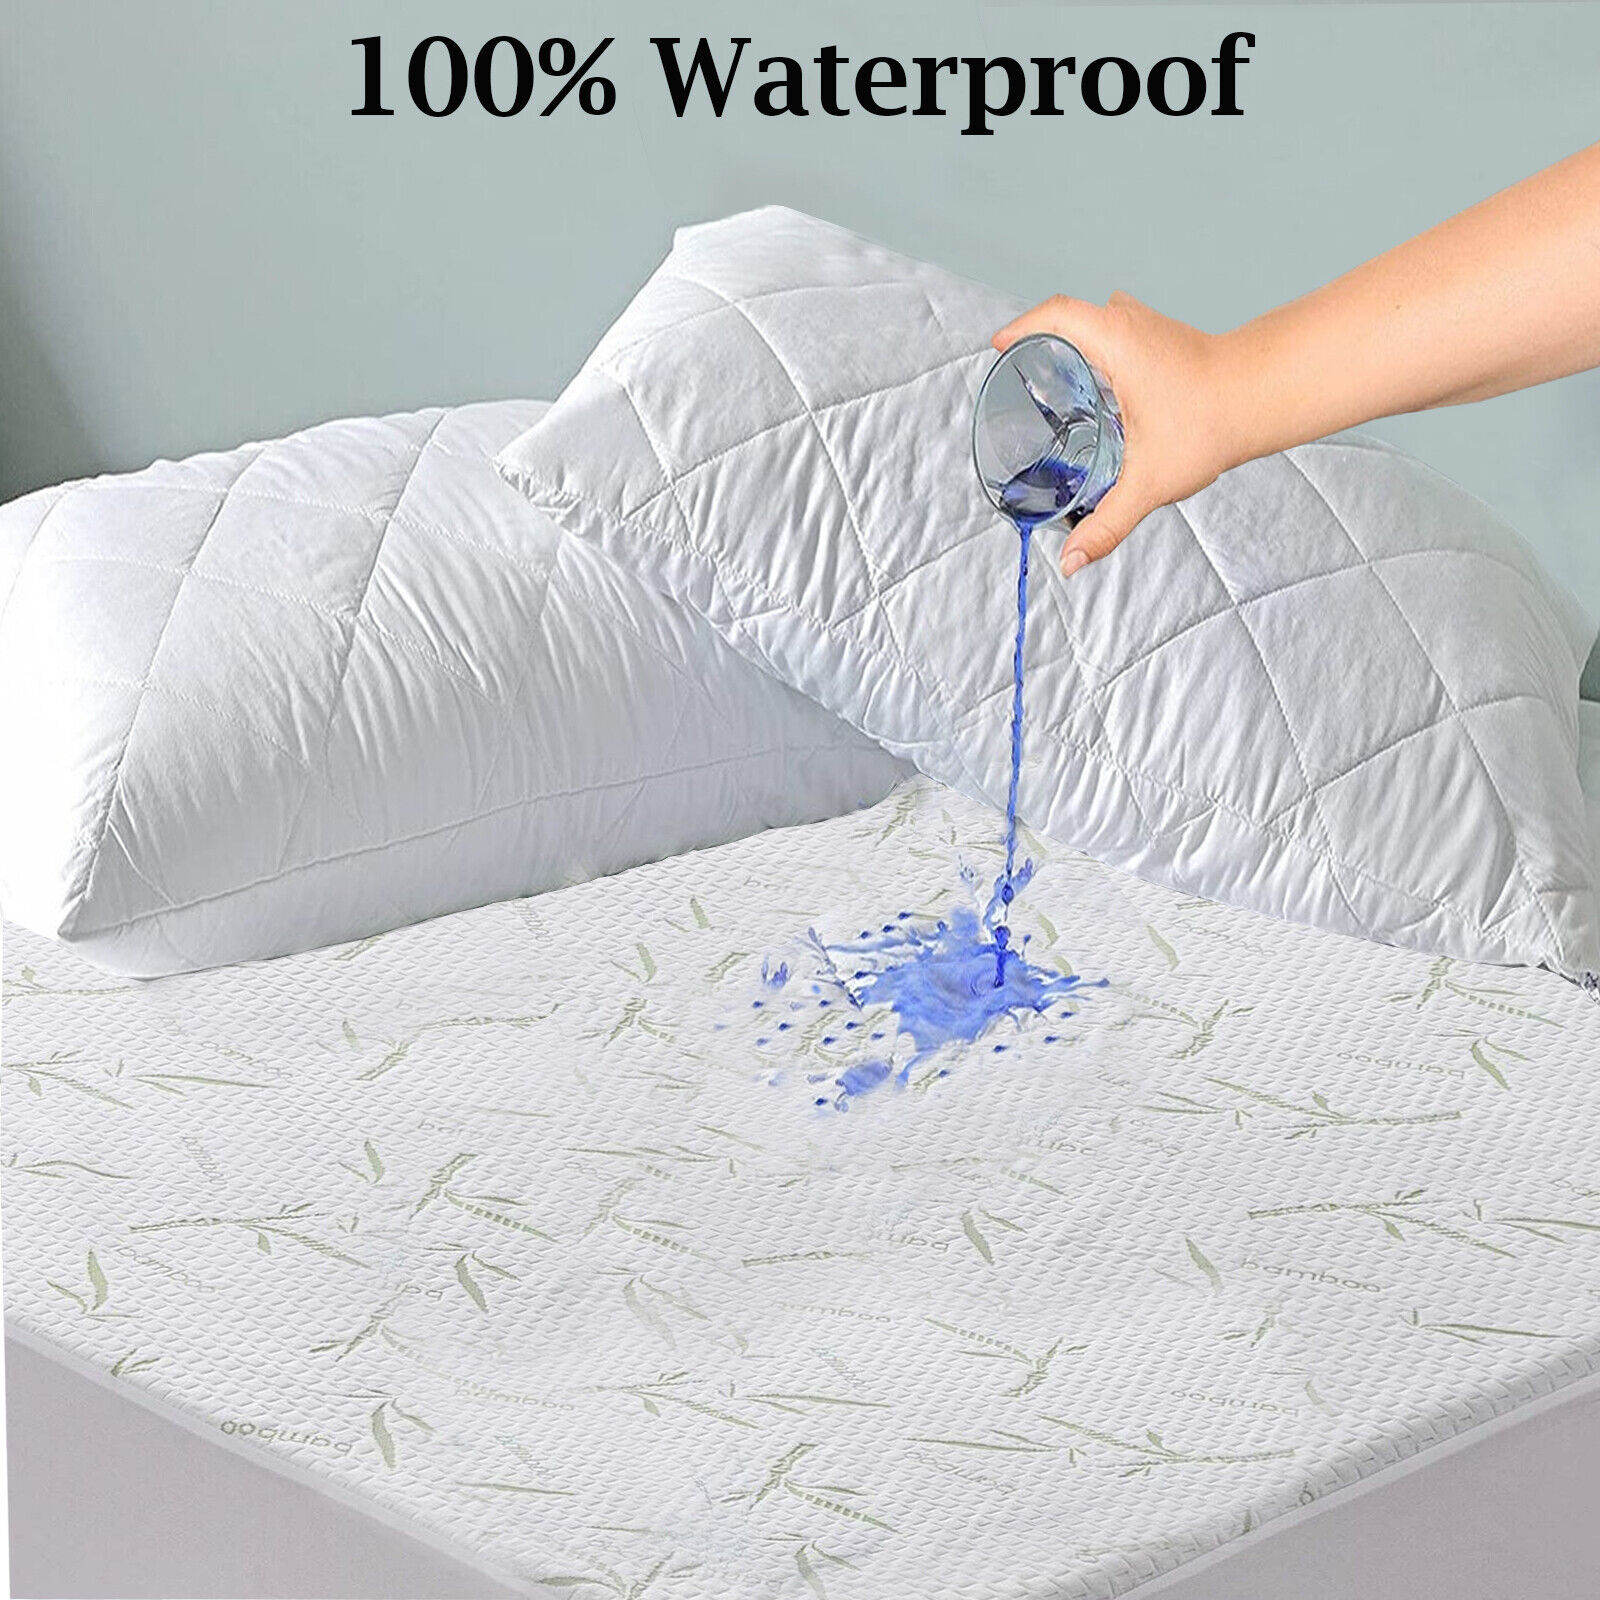 Bamboo Waterproof Mattress Protector Quilted Breathable Prem